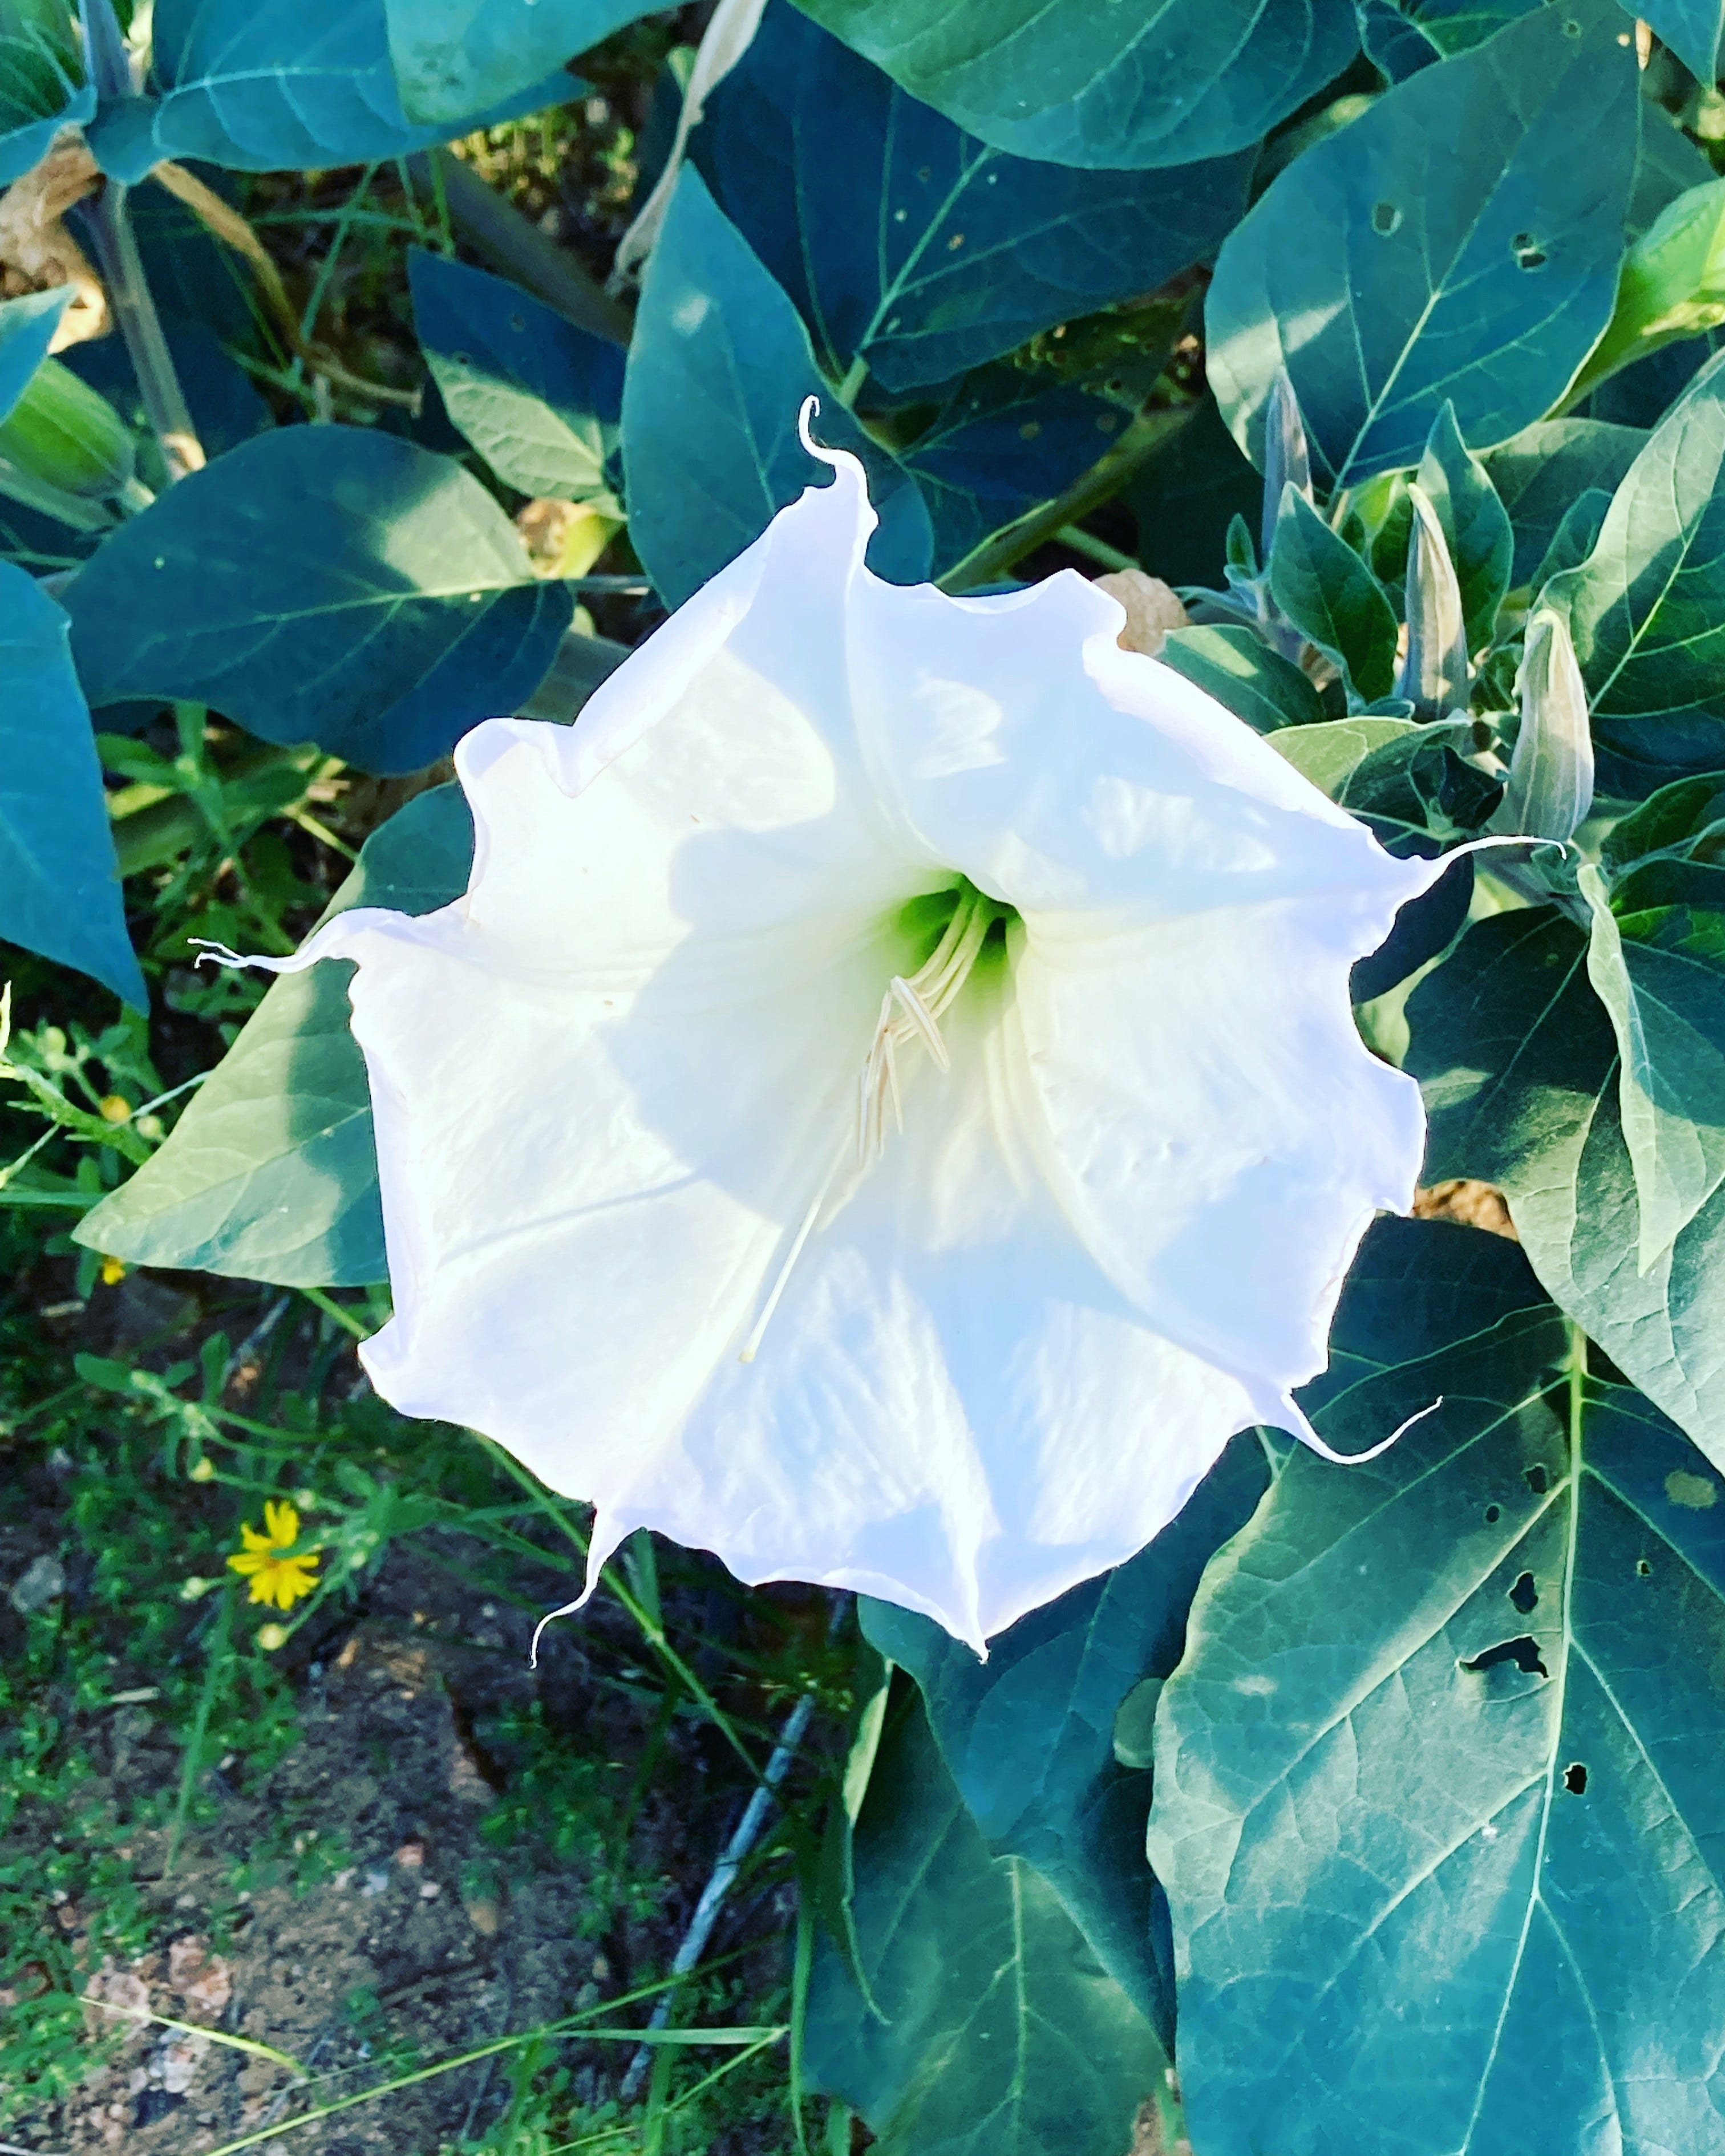 The Sacred Datura